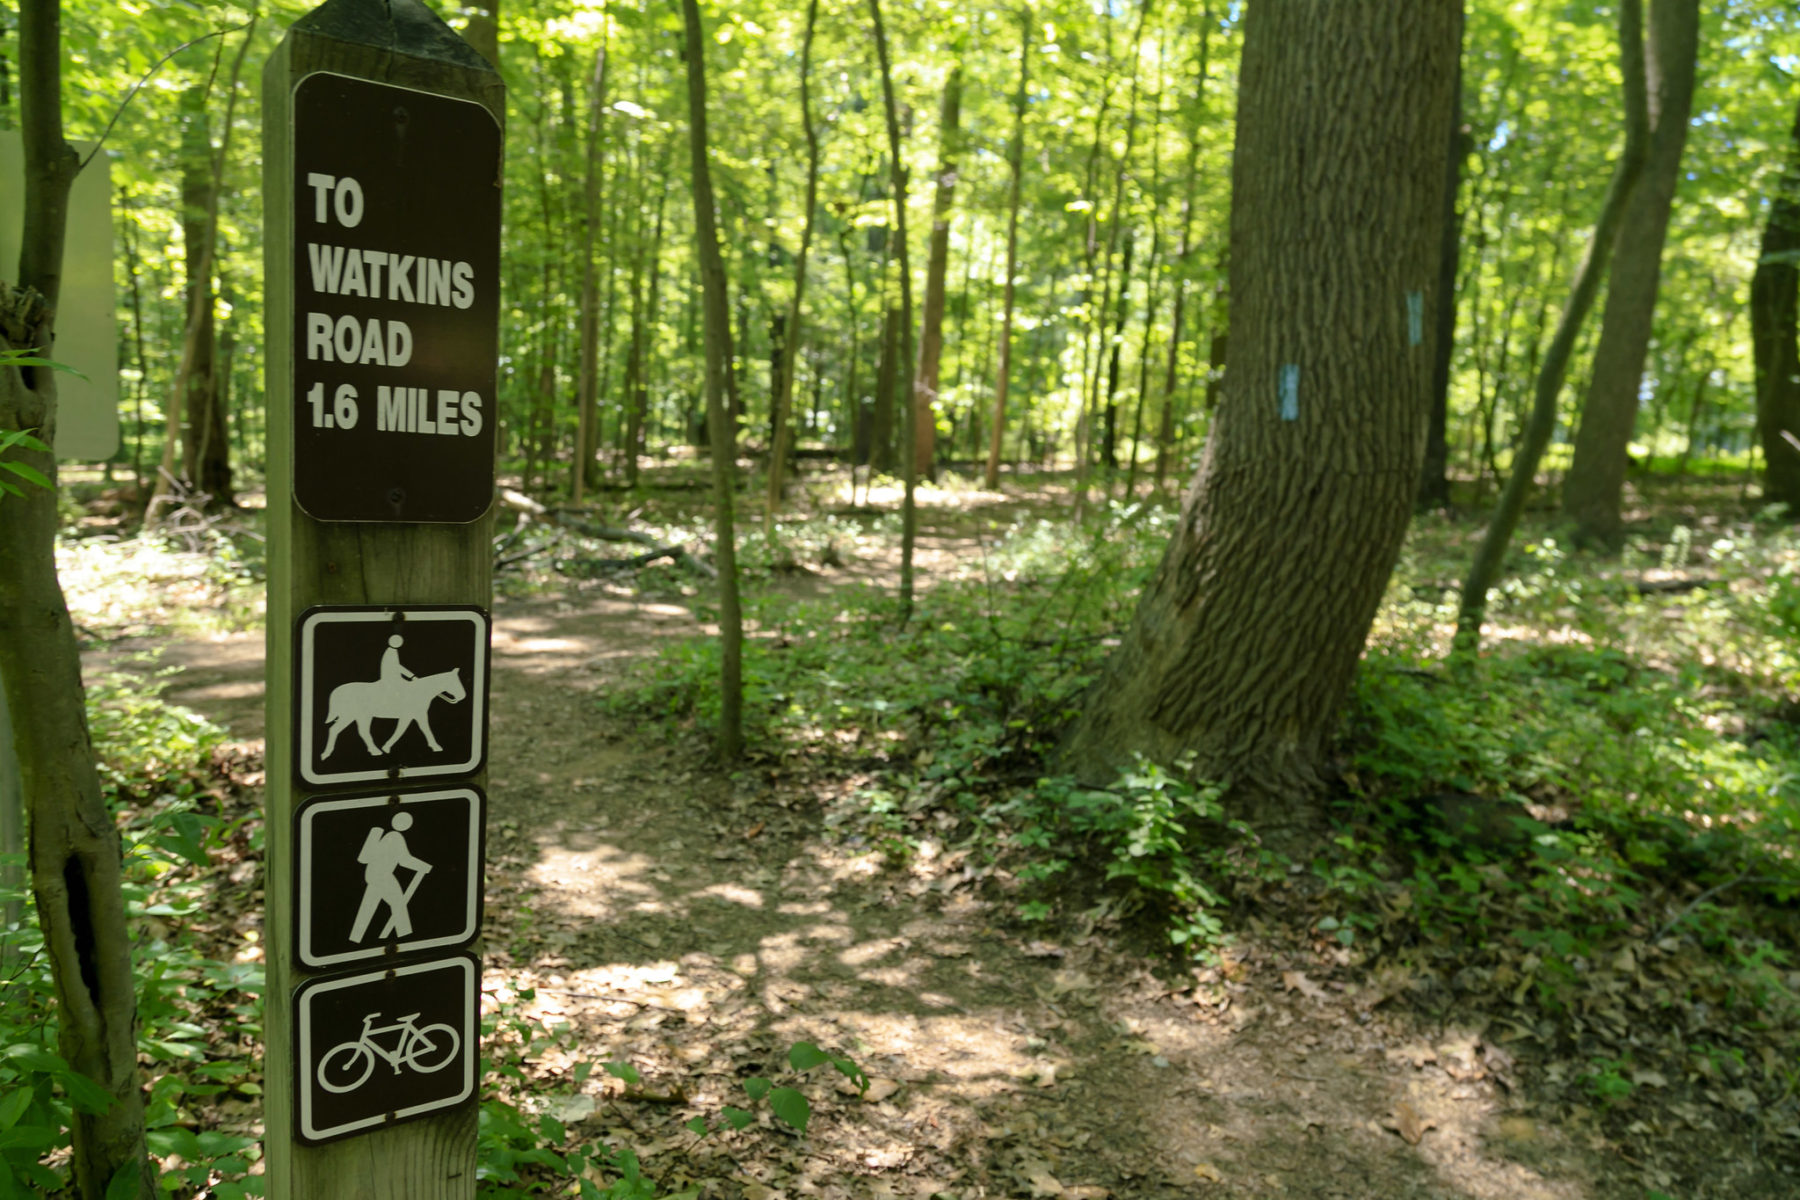 The trail marker indicates that the natural surface Magruder Stream Valley Trail is open to equestrians, hikers, and cyclists.